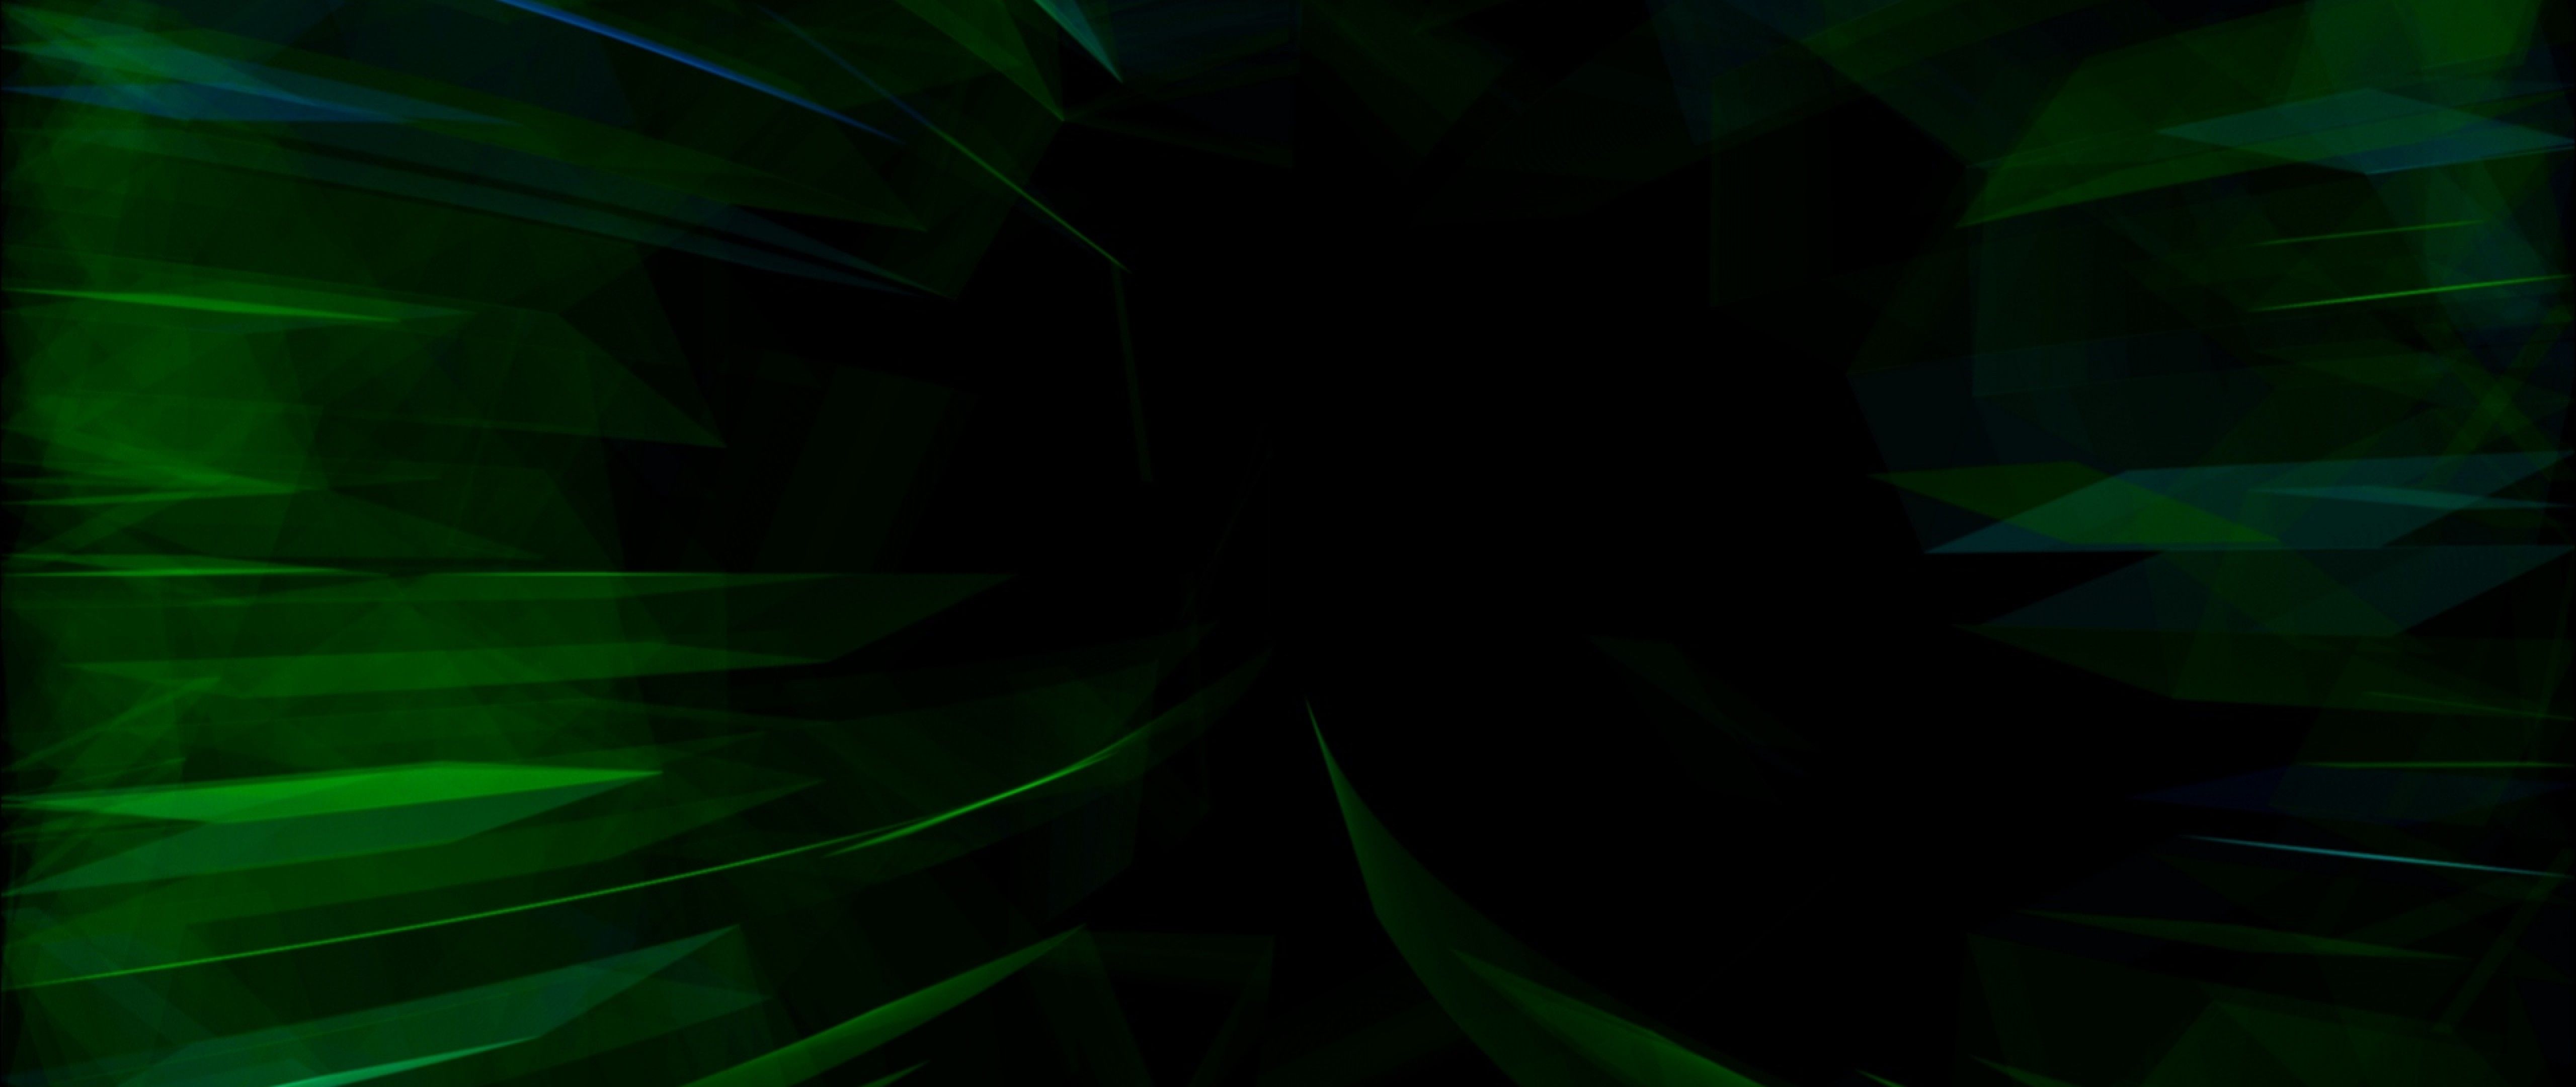 4K Green And Black Wallpapers - Wallpaper Cave